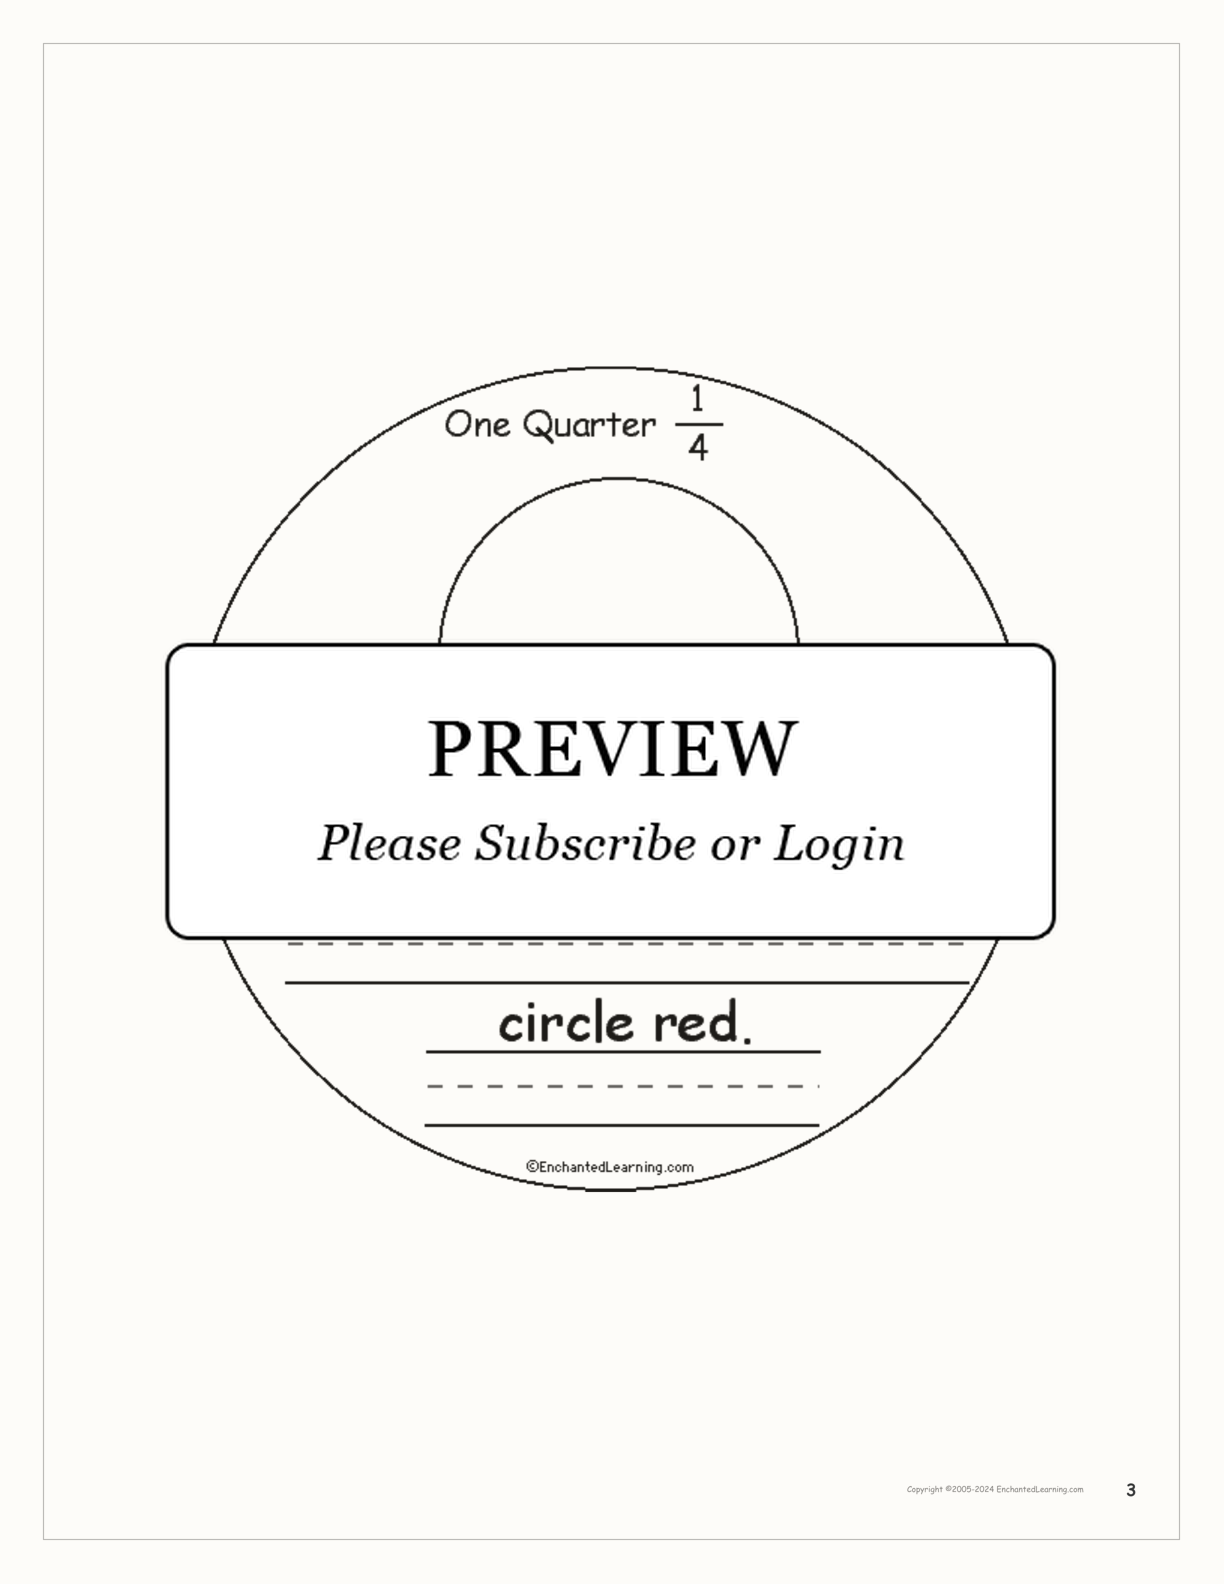 One Quarter: A Book on Fractions interactive printout page 3